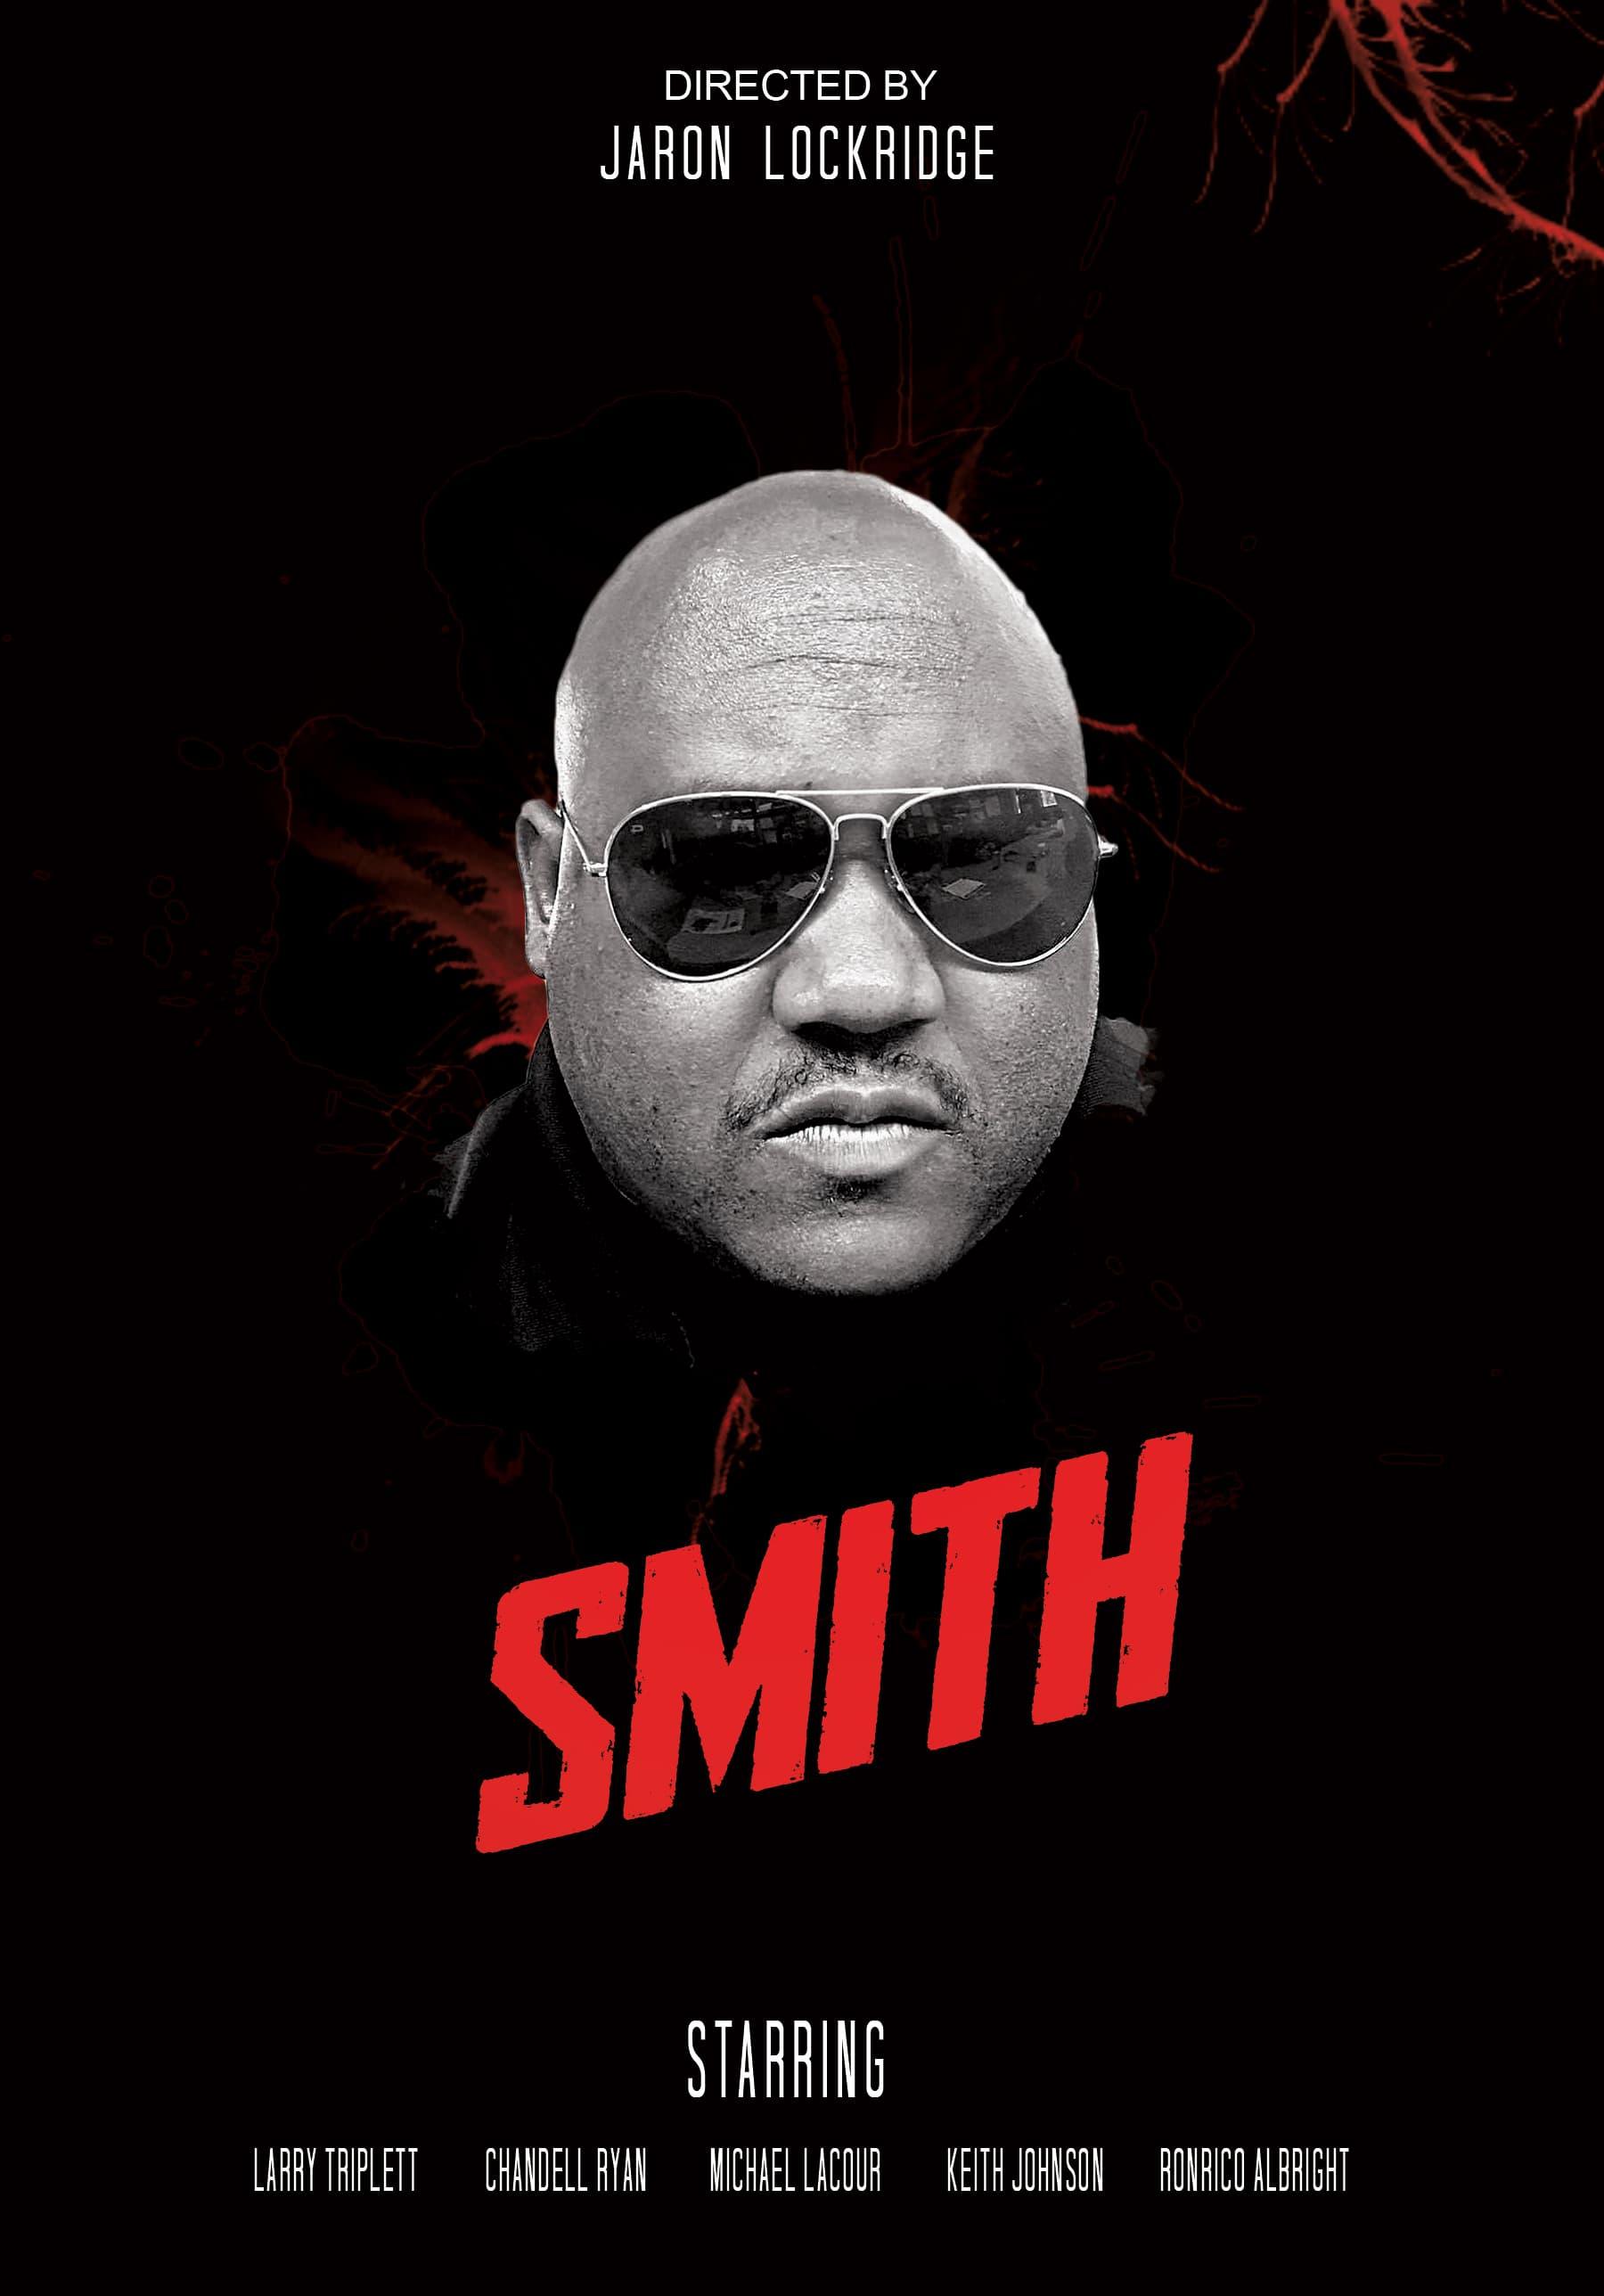 Smith poster